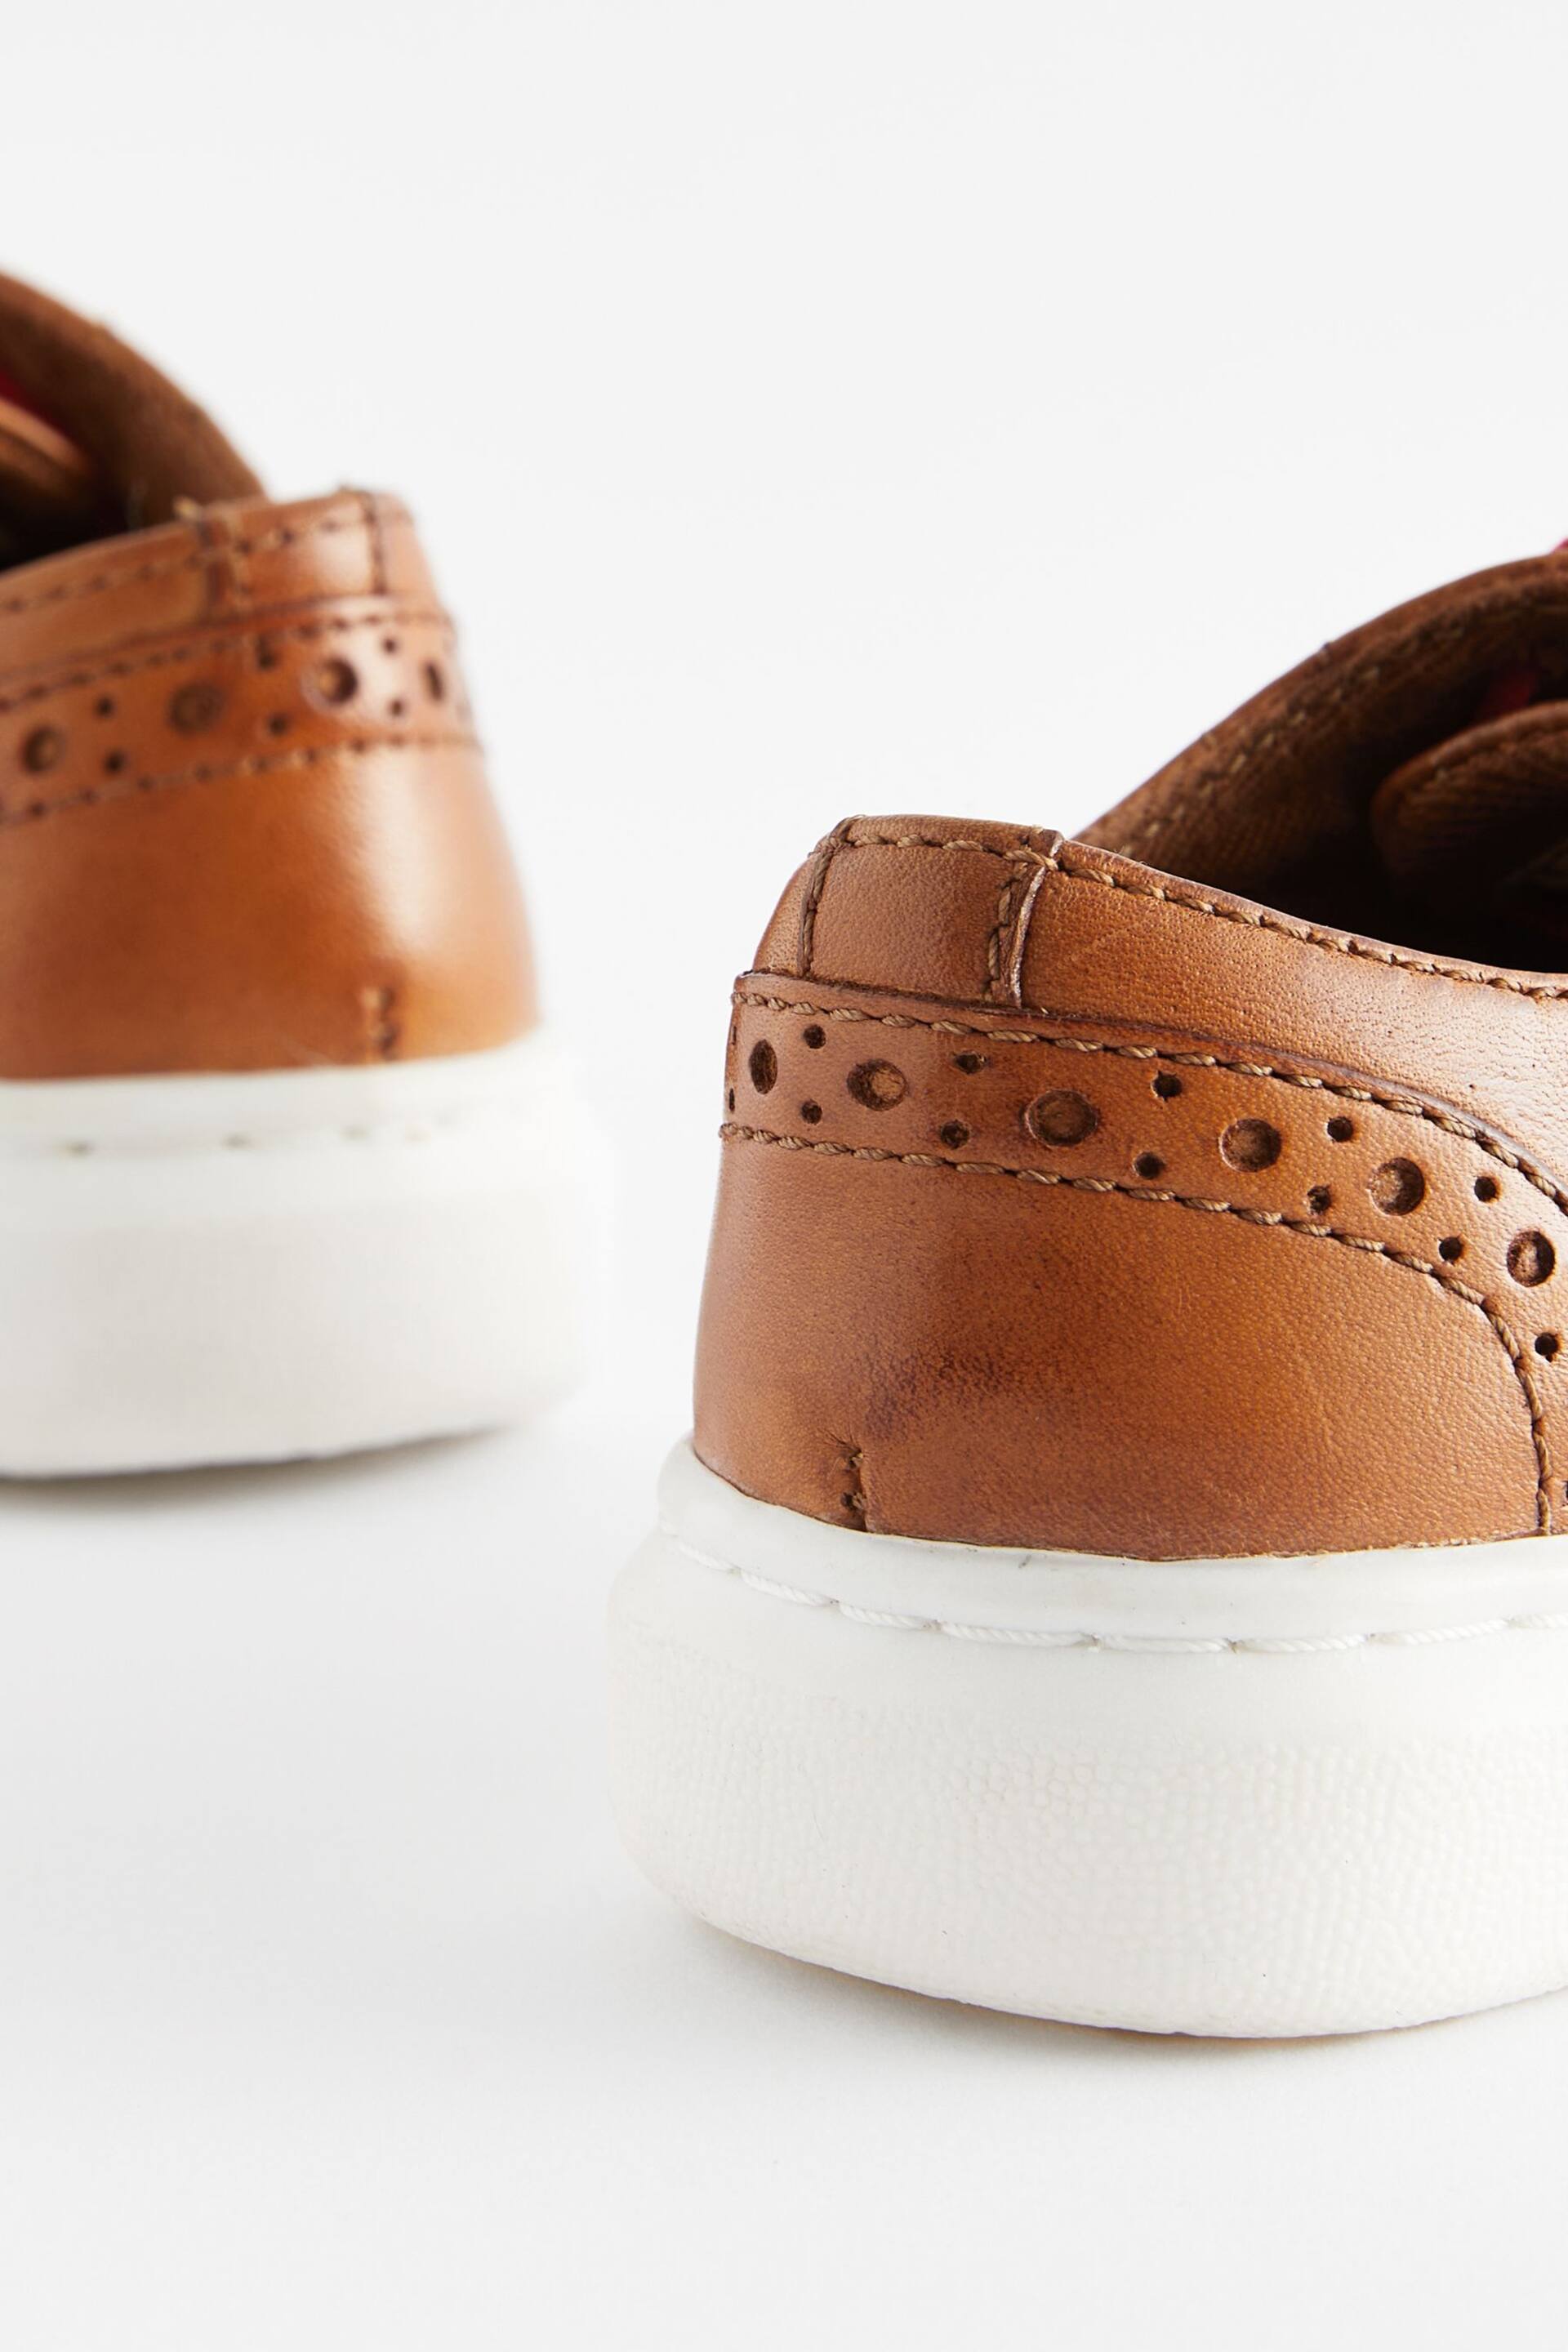 Tan Brown Brogue Smart Leather Lace-Up Shoes - Image 9 of 9